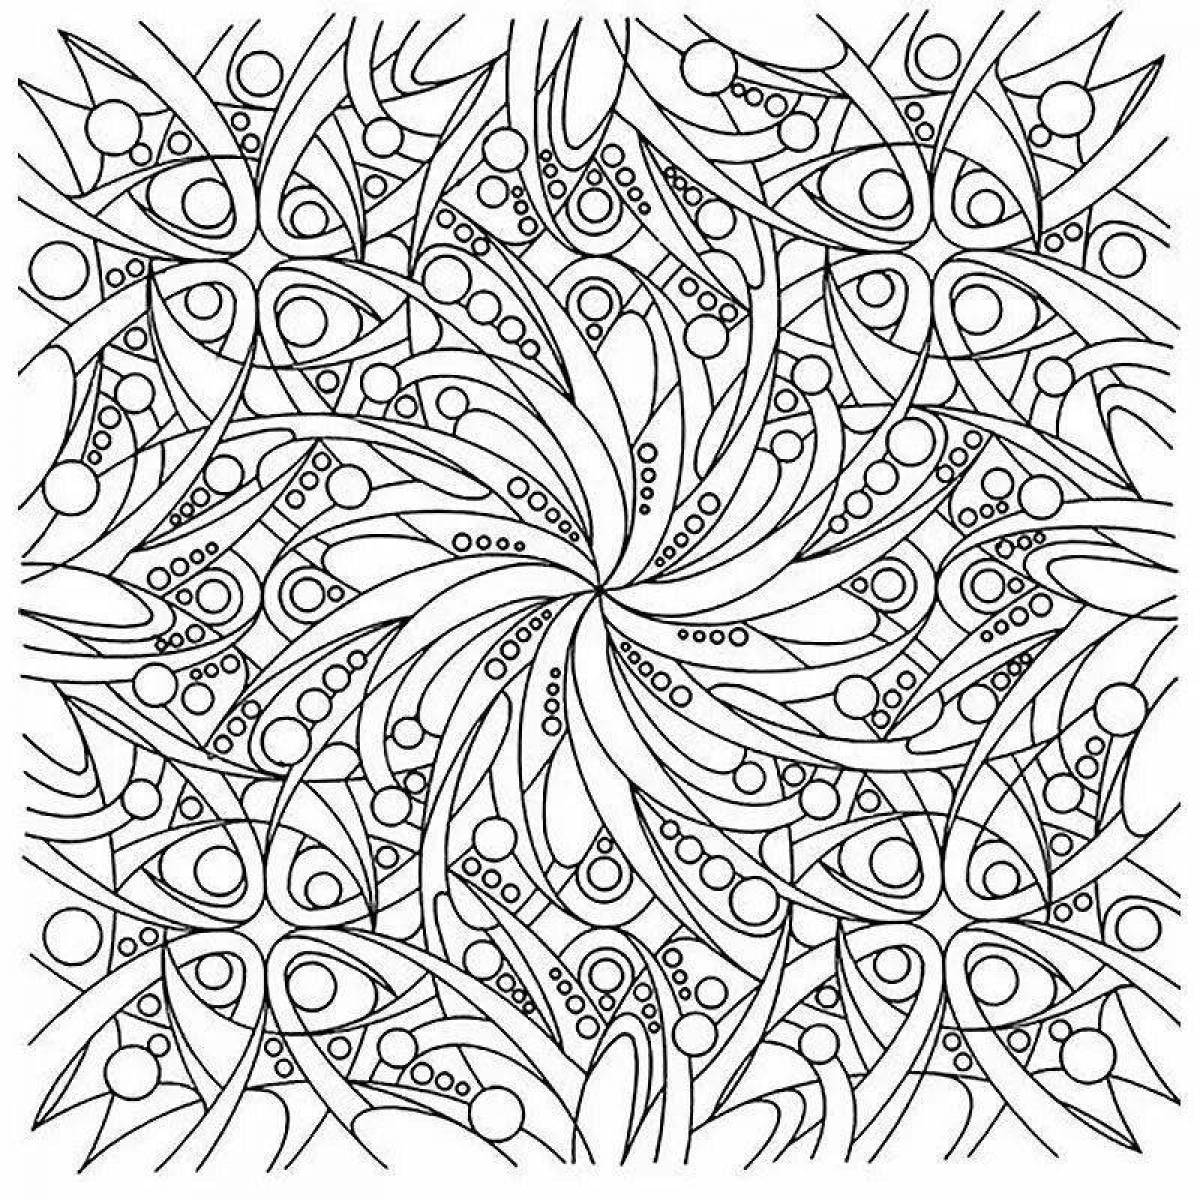 Decorative patterns and ornaments for coloring pages